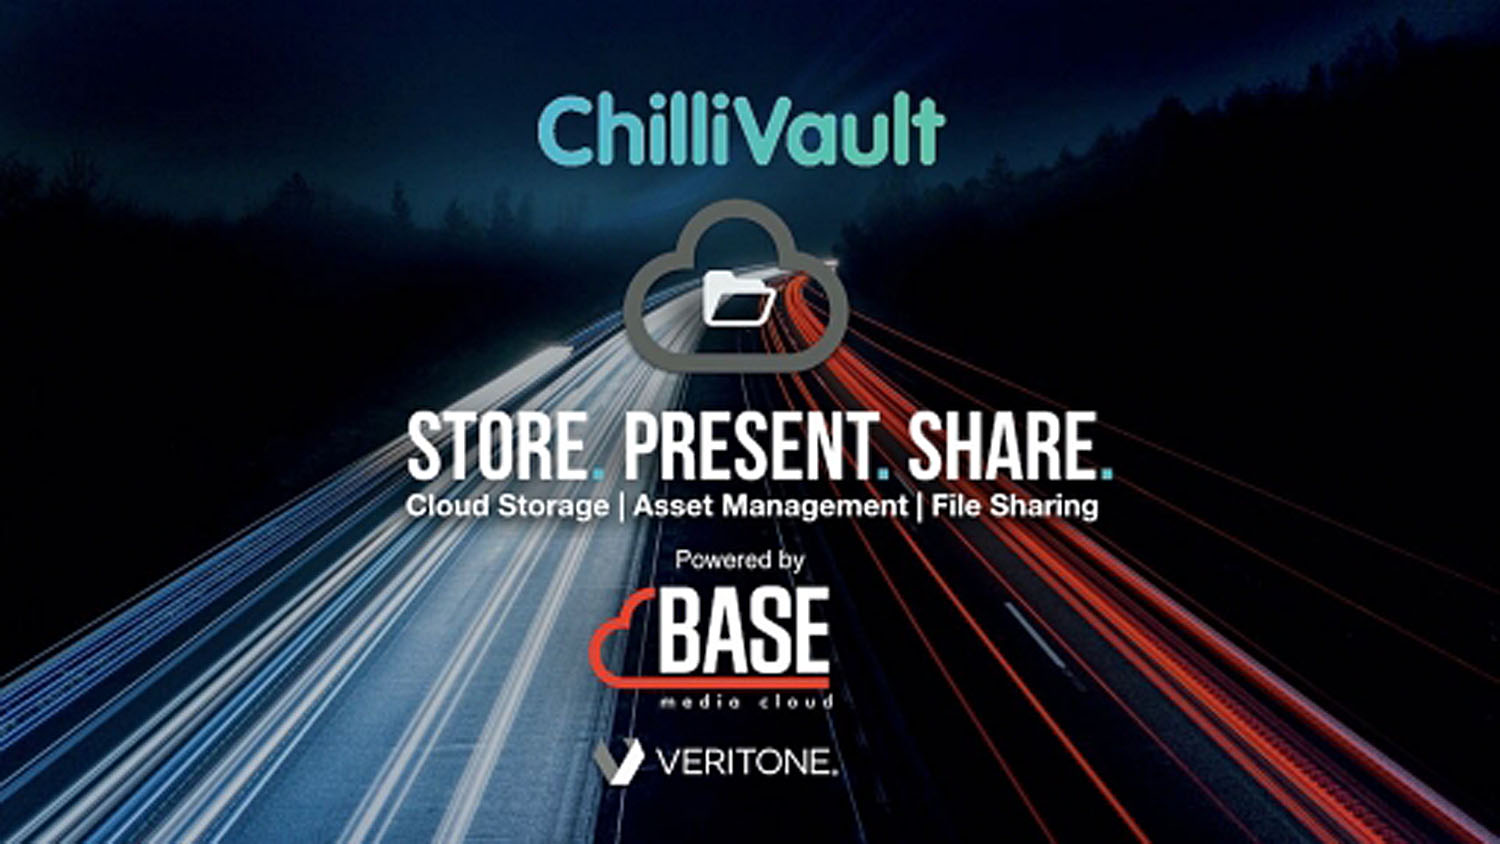 ChilliVault moves to Base Media Cloud